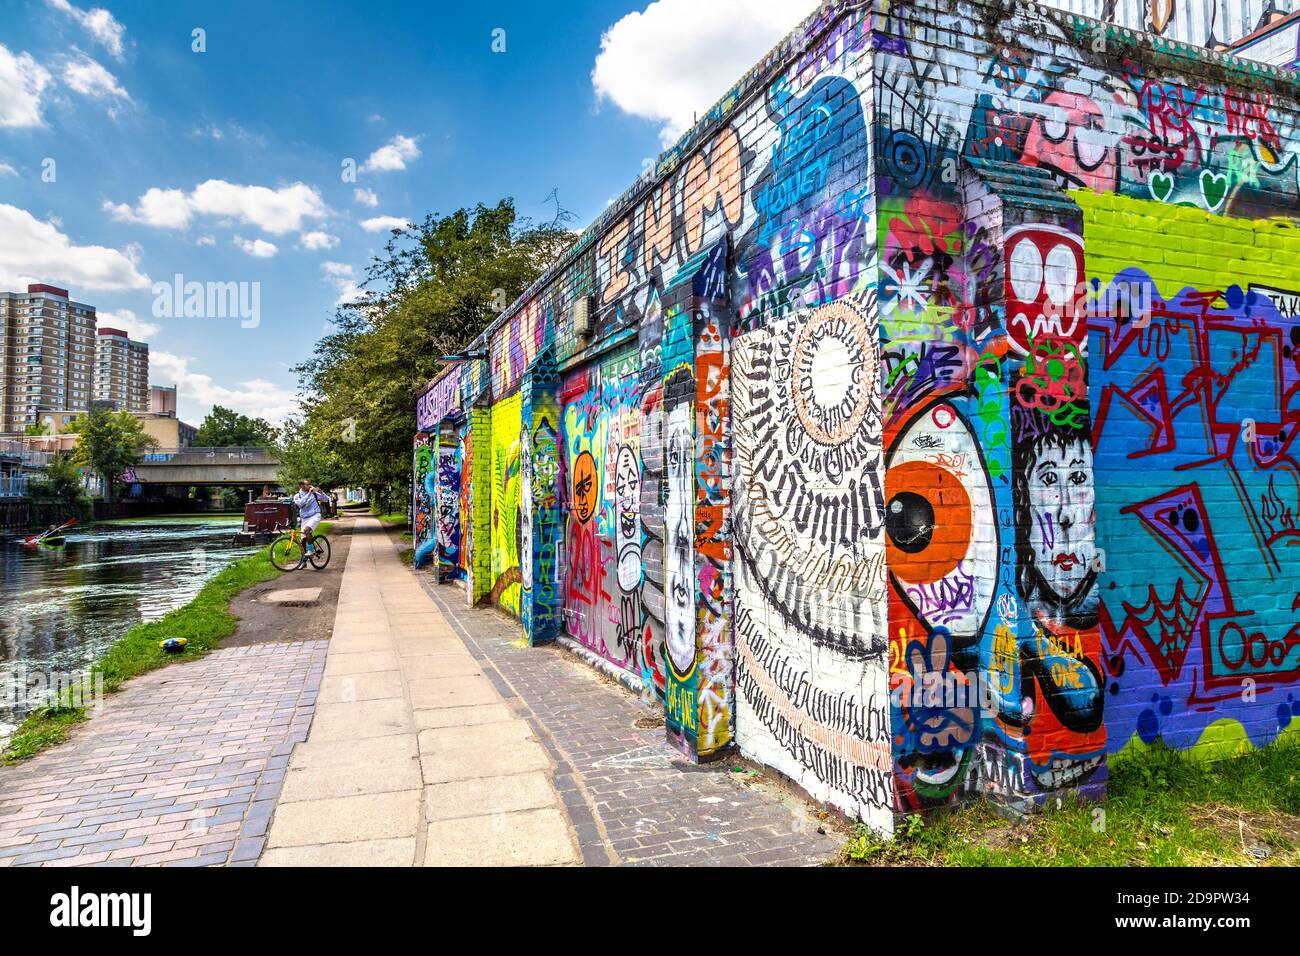 Murals and street art along Hertford Union Canal in East London, UK Stock Photo